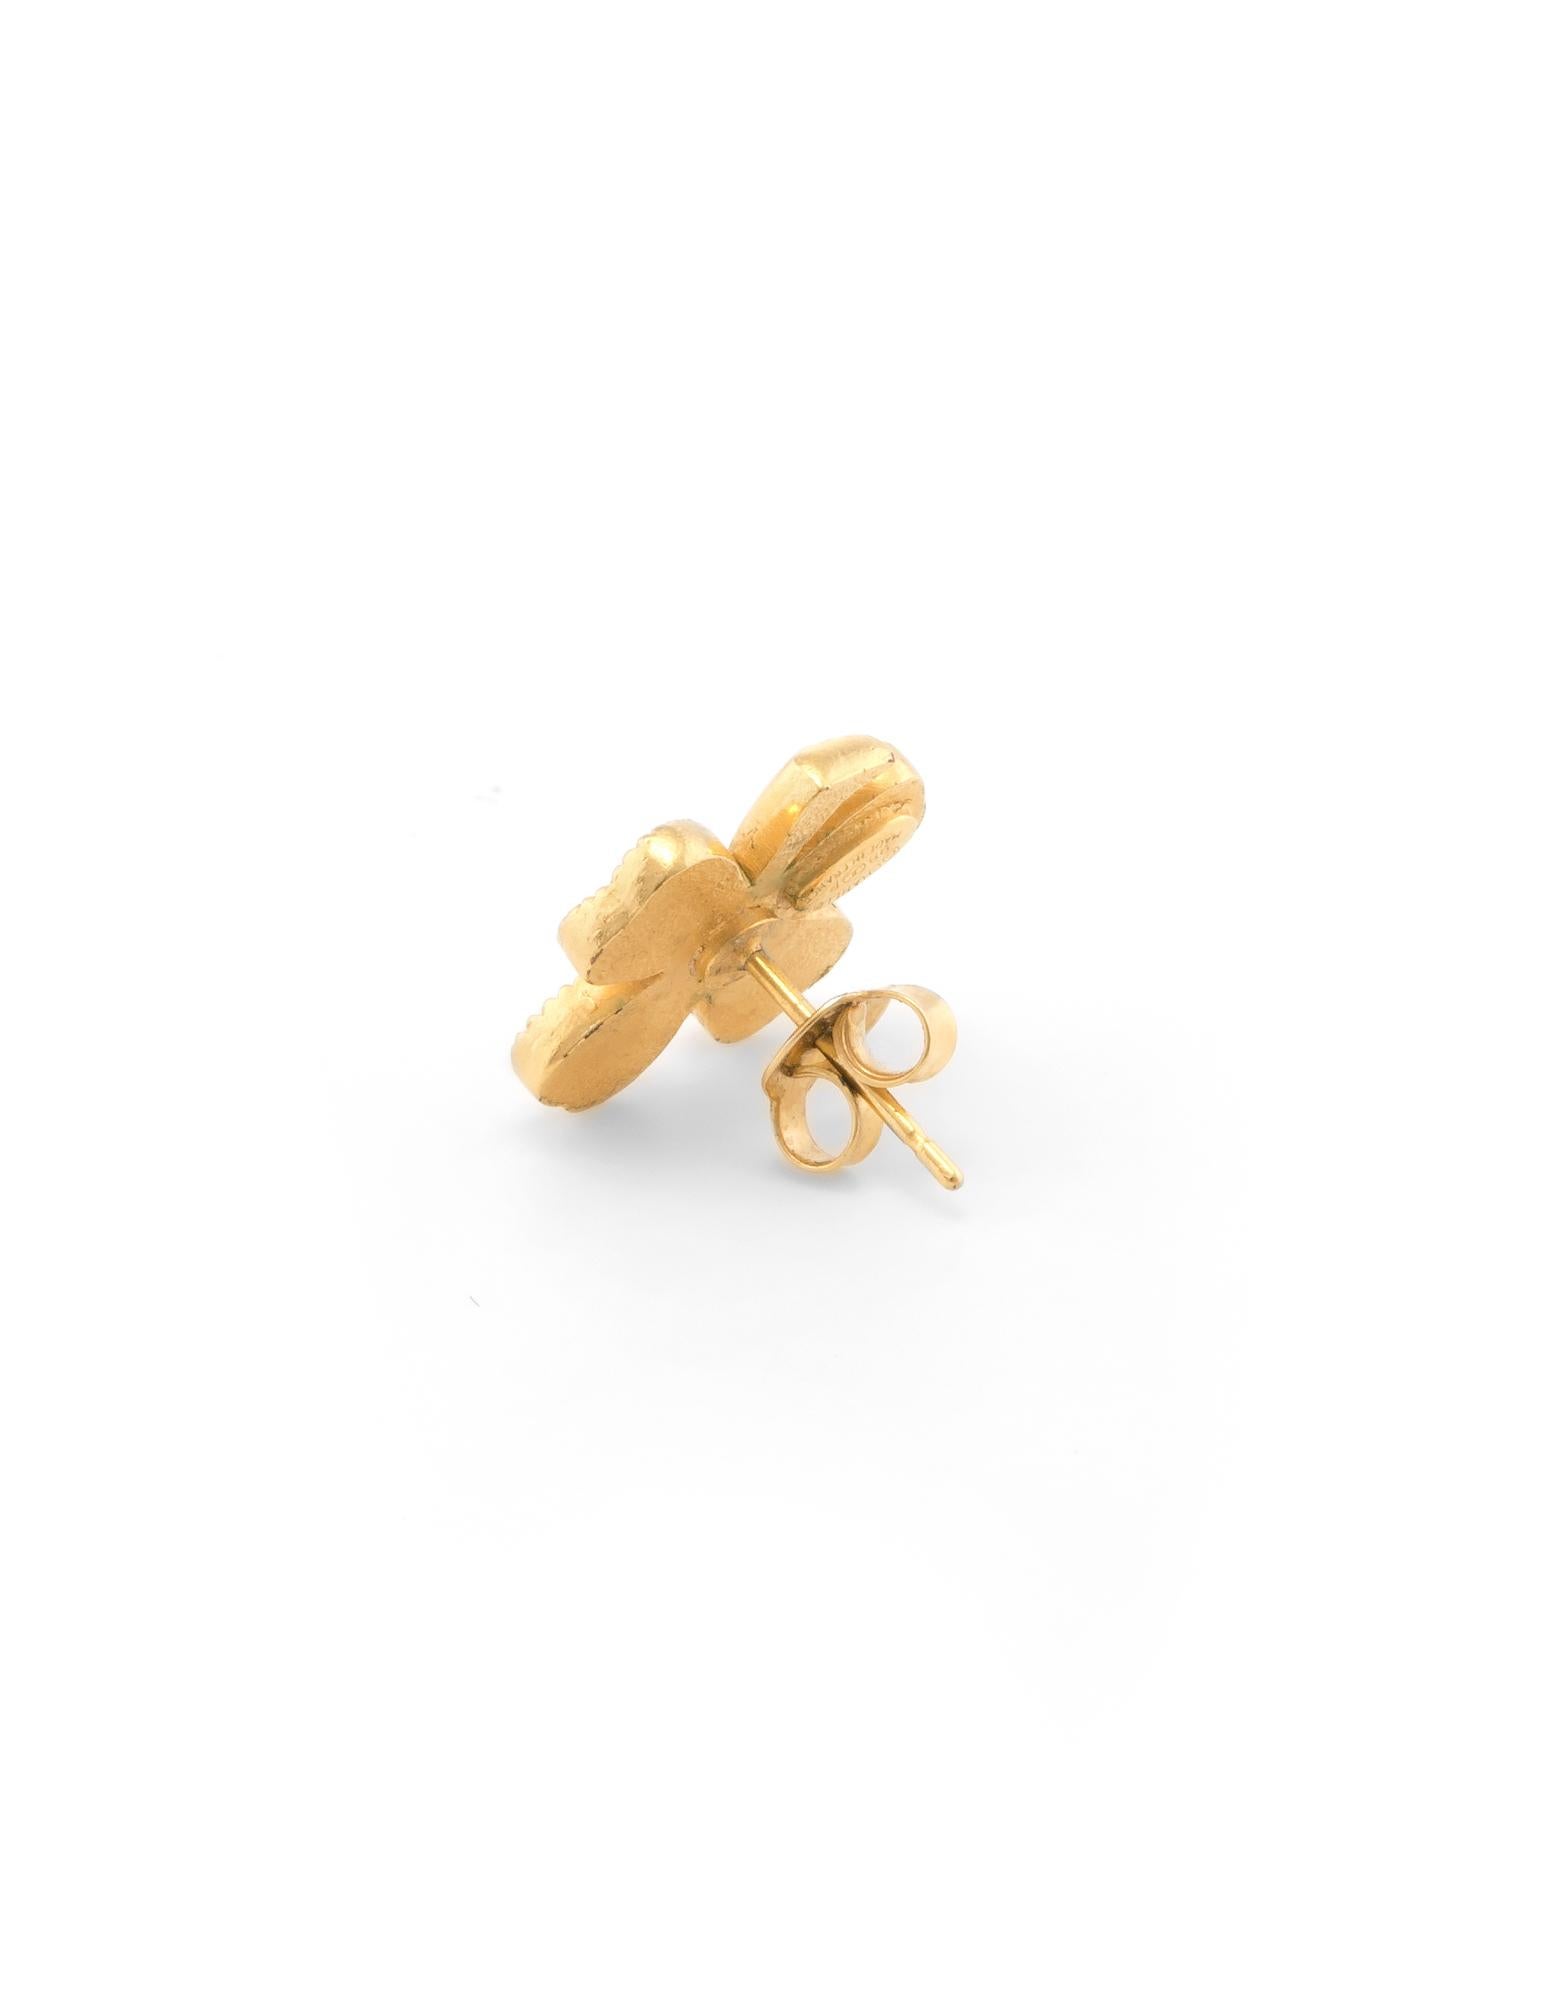 Chanel four leaf clover earrings crafted in yellow gold tone (circa 1998).
 
Five white crystals are set into each leaf. The crystals are in-tact and in good condition. 

The smaller stud earrings are fitted with post and butterfly backings for